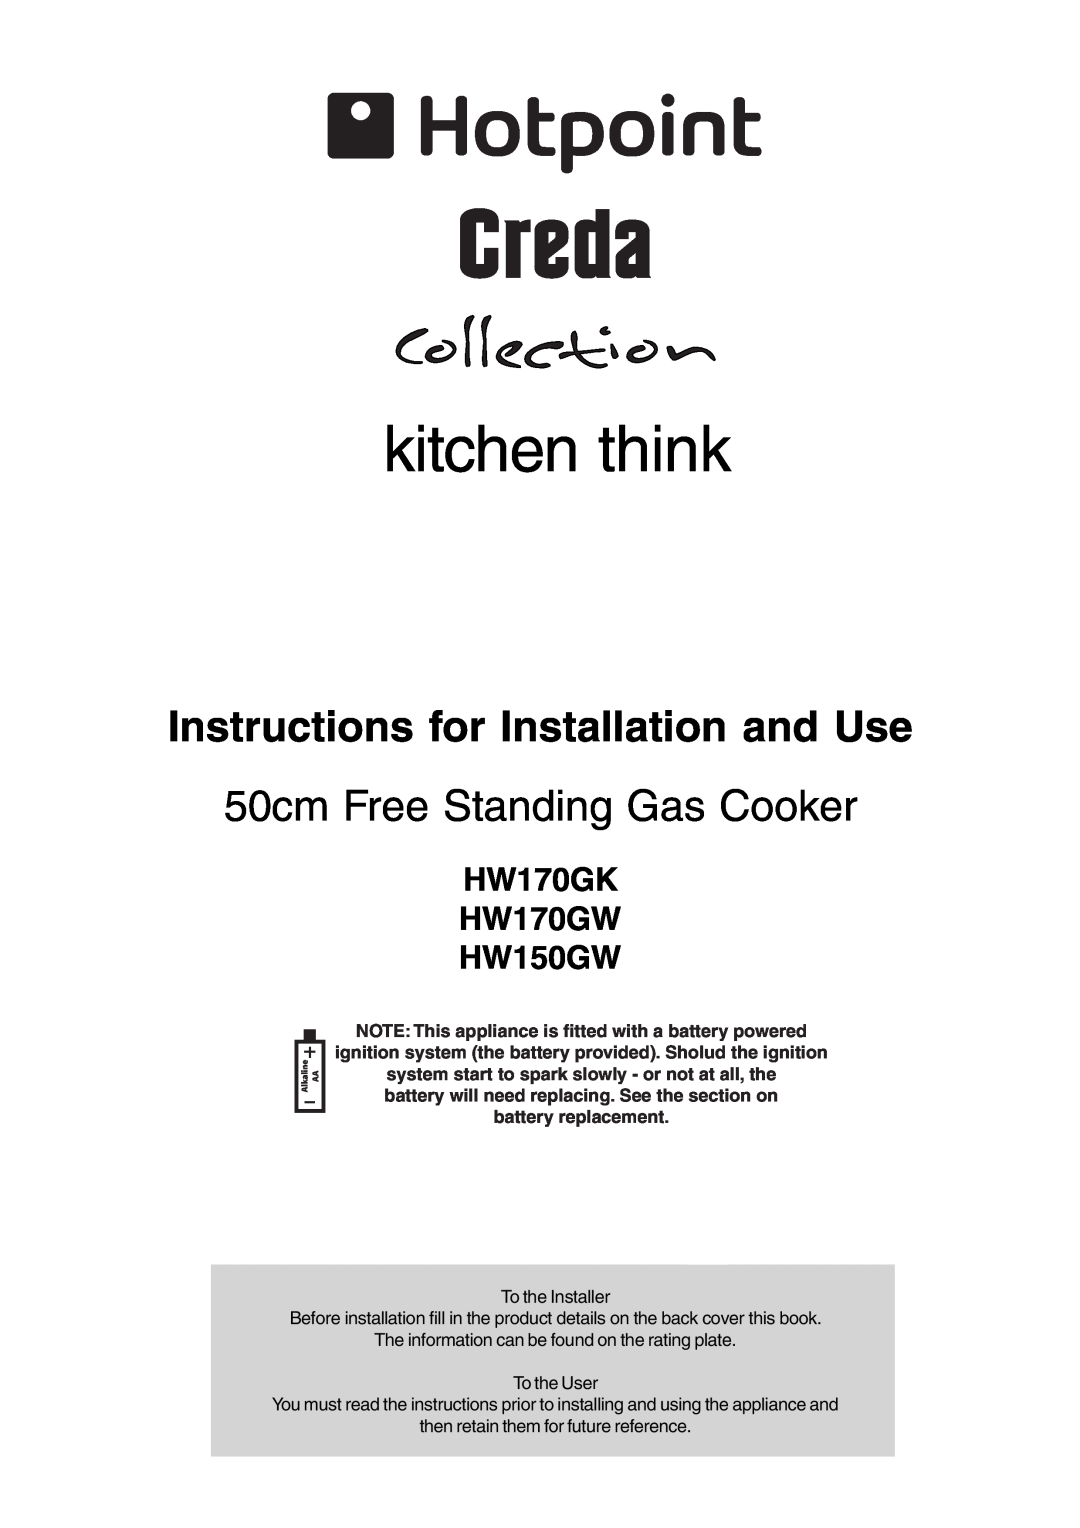 Hotpoint manual HW170GK HW170GW HW150GW, kitchen think, Instructions for Installation and Use 